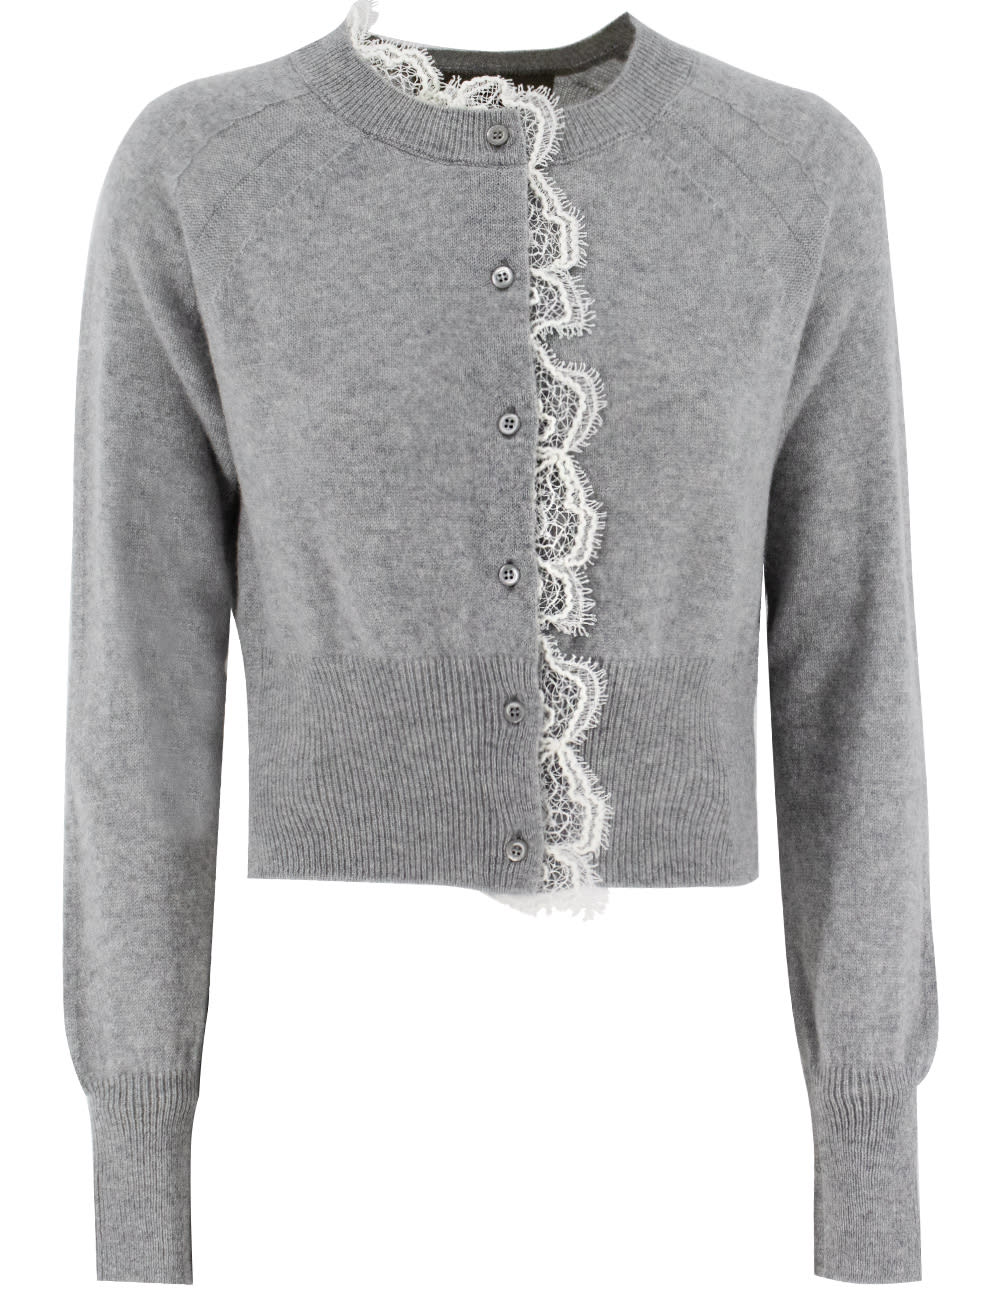 Grey Cashmere Cardigan With White Lace